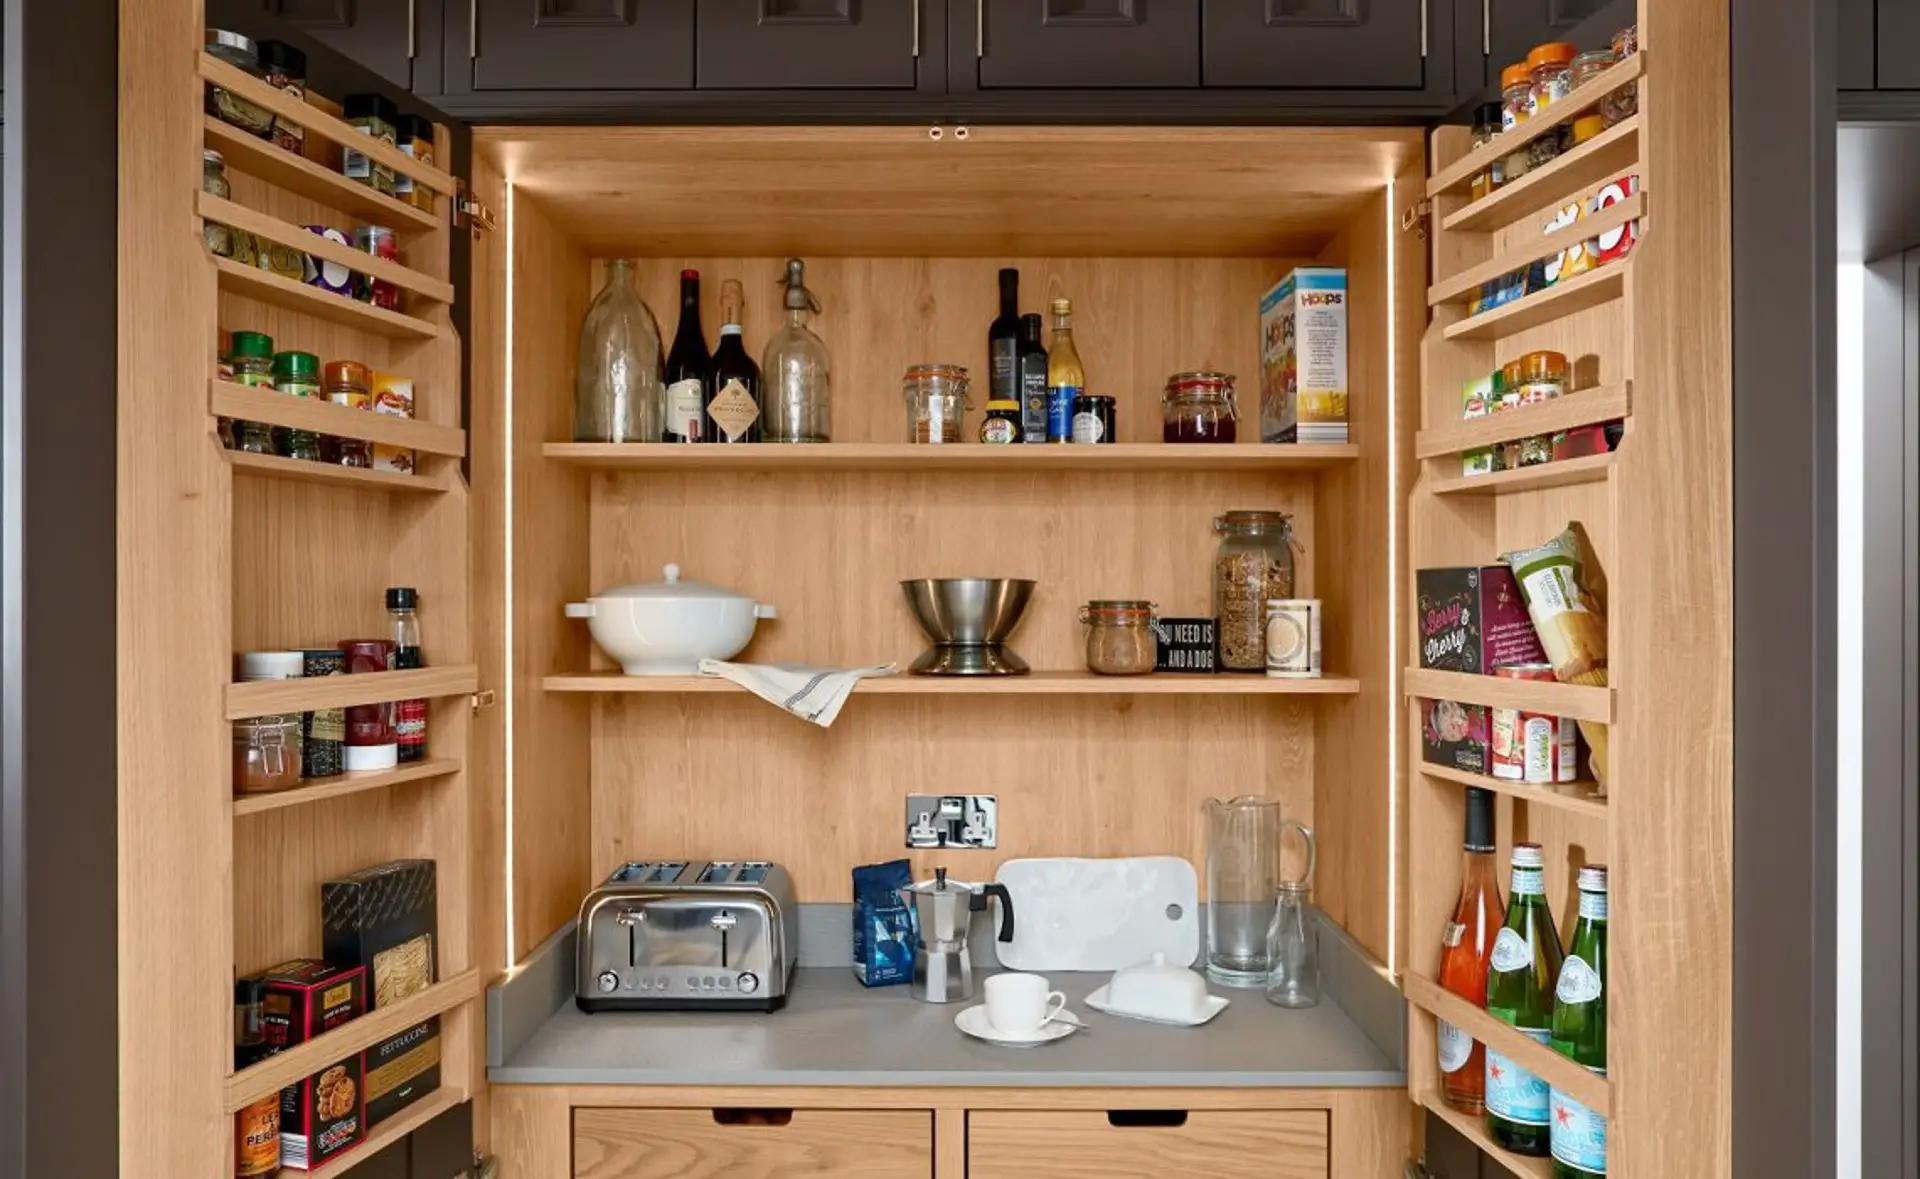 Benefits Of A Pantry In The Kitchen